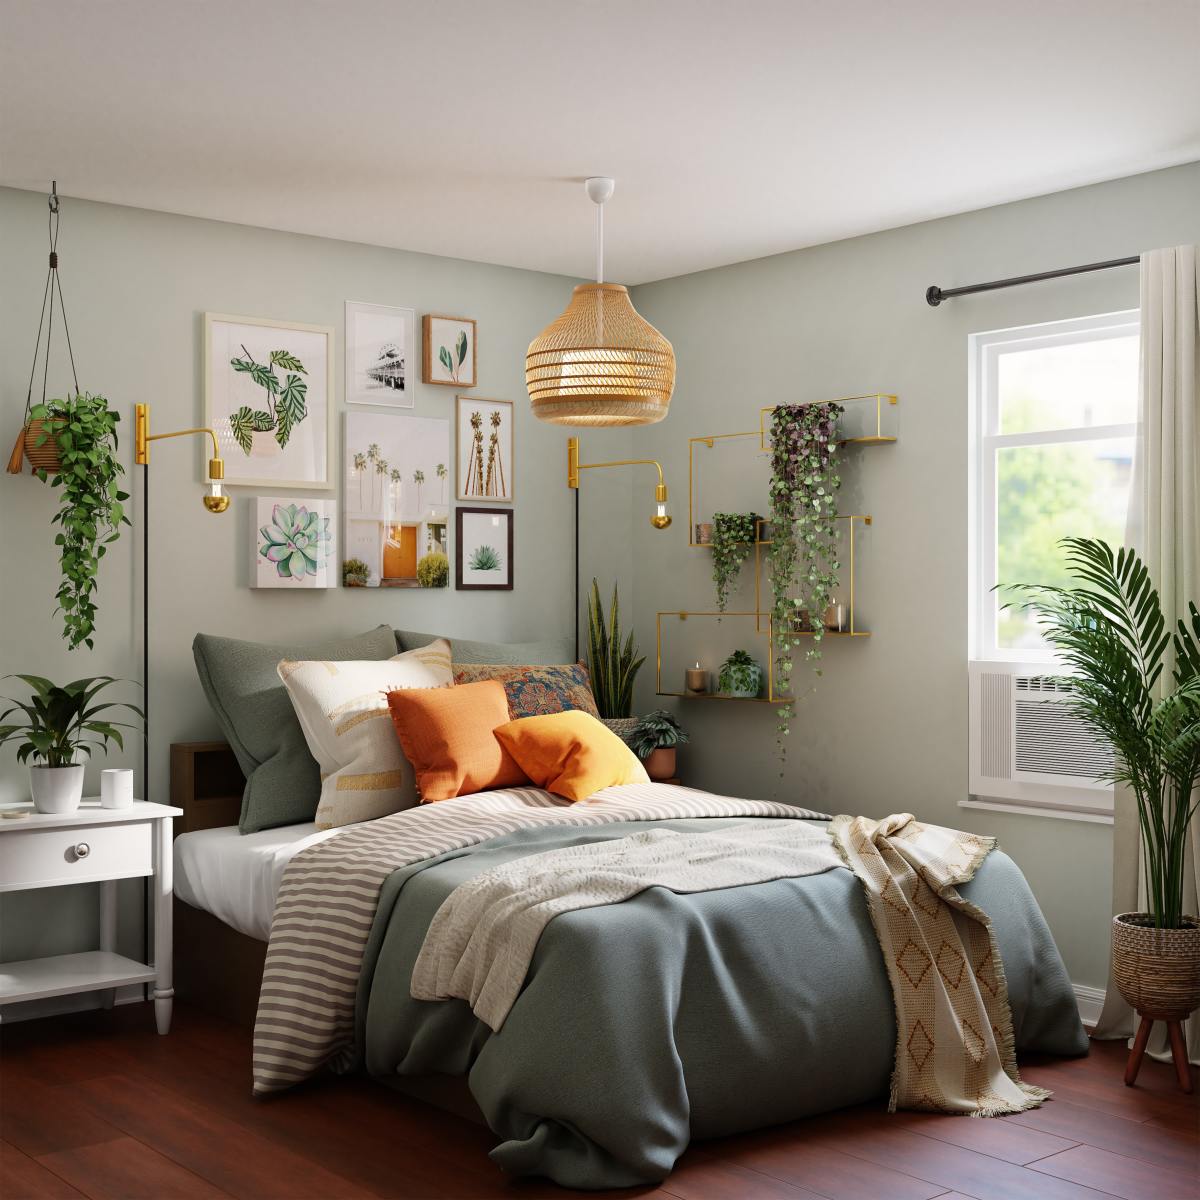 A light faded green works well in a Taurus bedroom because it's soothing and unassuming. More vibrant colors add energy, which can make it more challenging to sleep.